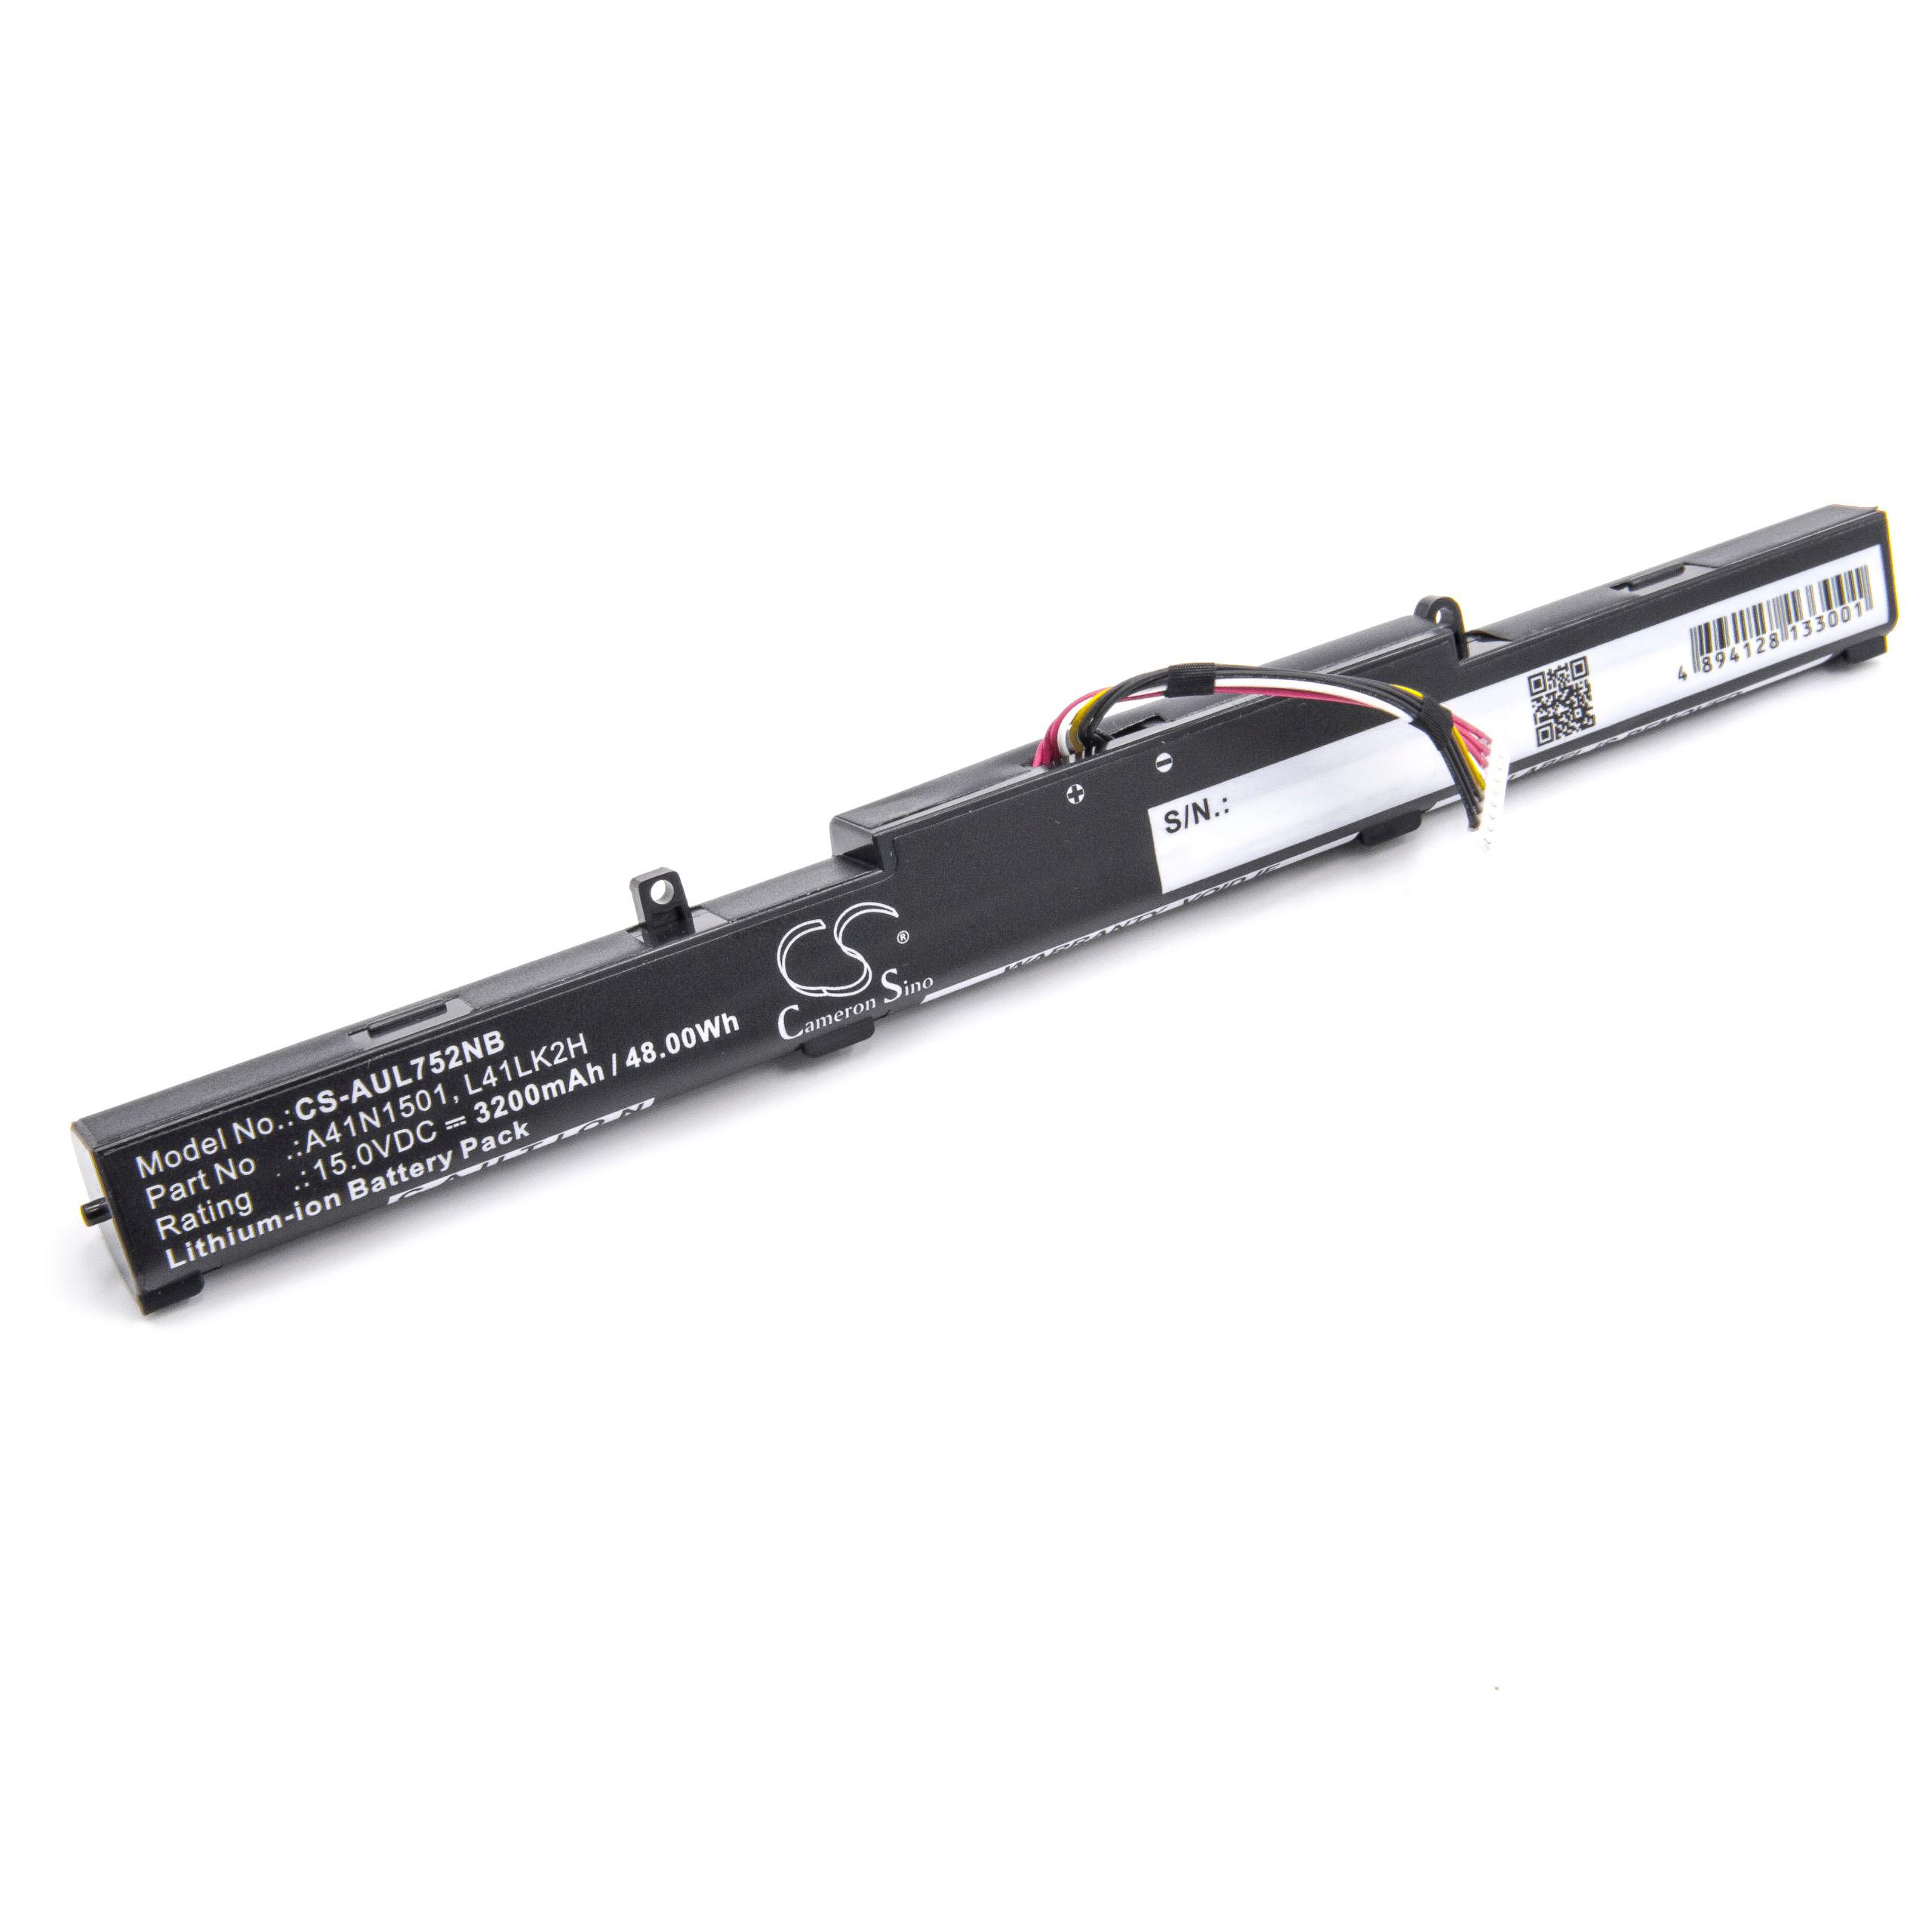 Notebook Battery Replacement for Asus 0B110-00360100, A41Lk9H, 0B110-00360000, A41N1501 - 3200mAh 15V Li-Ion